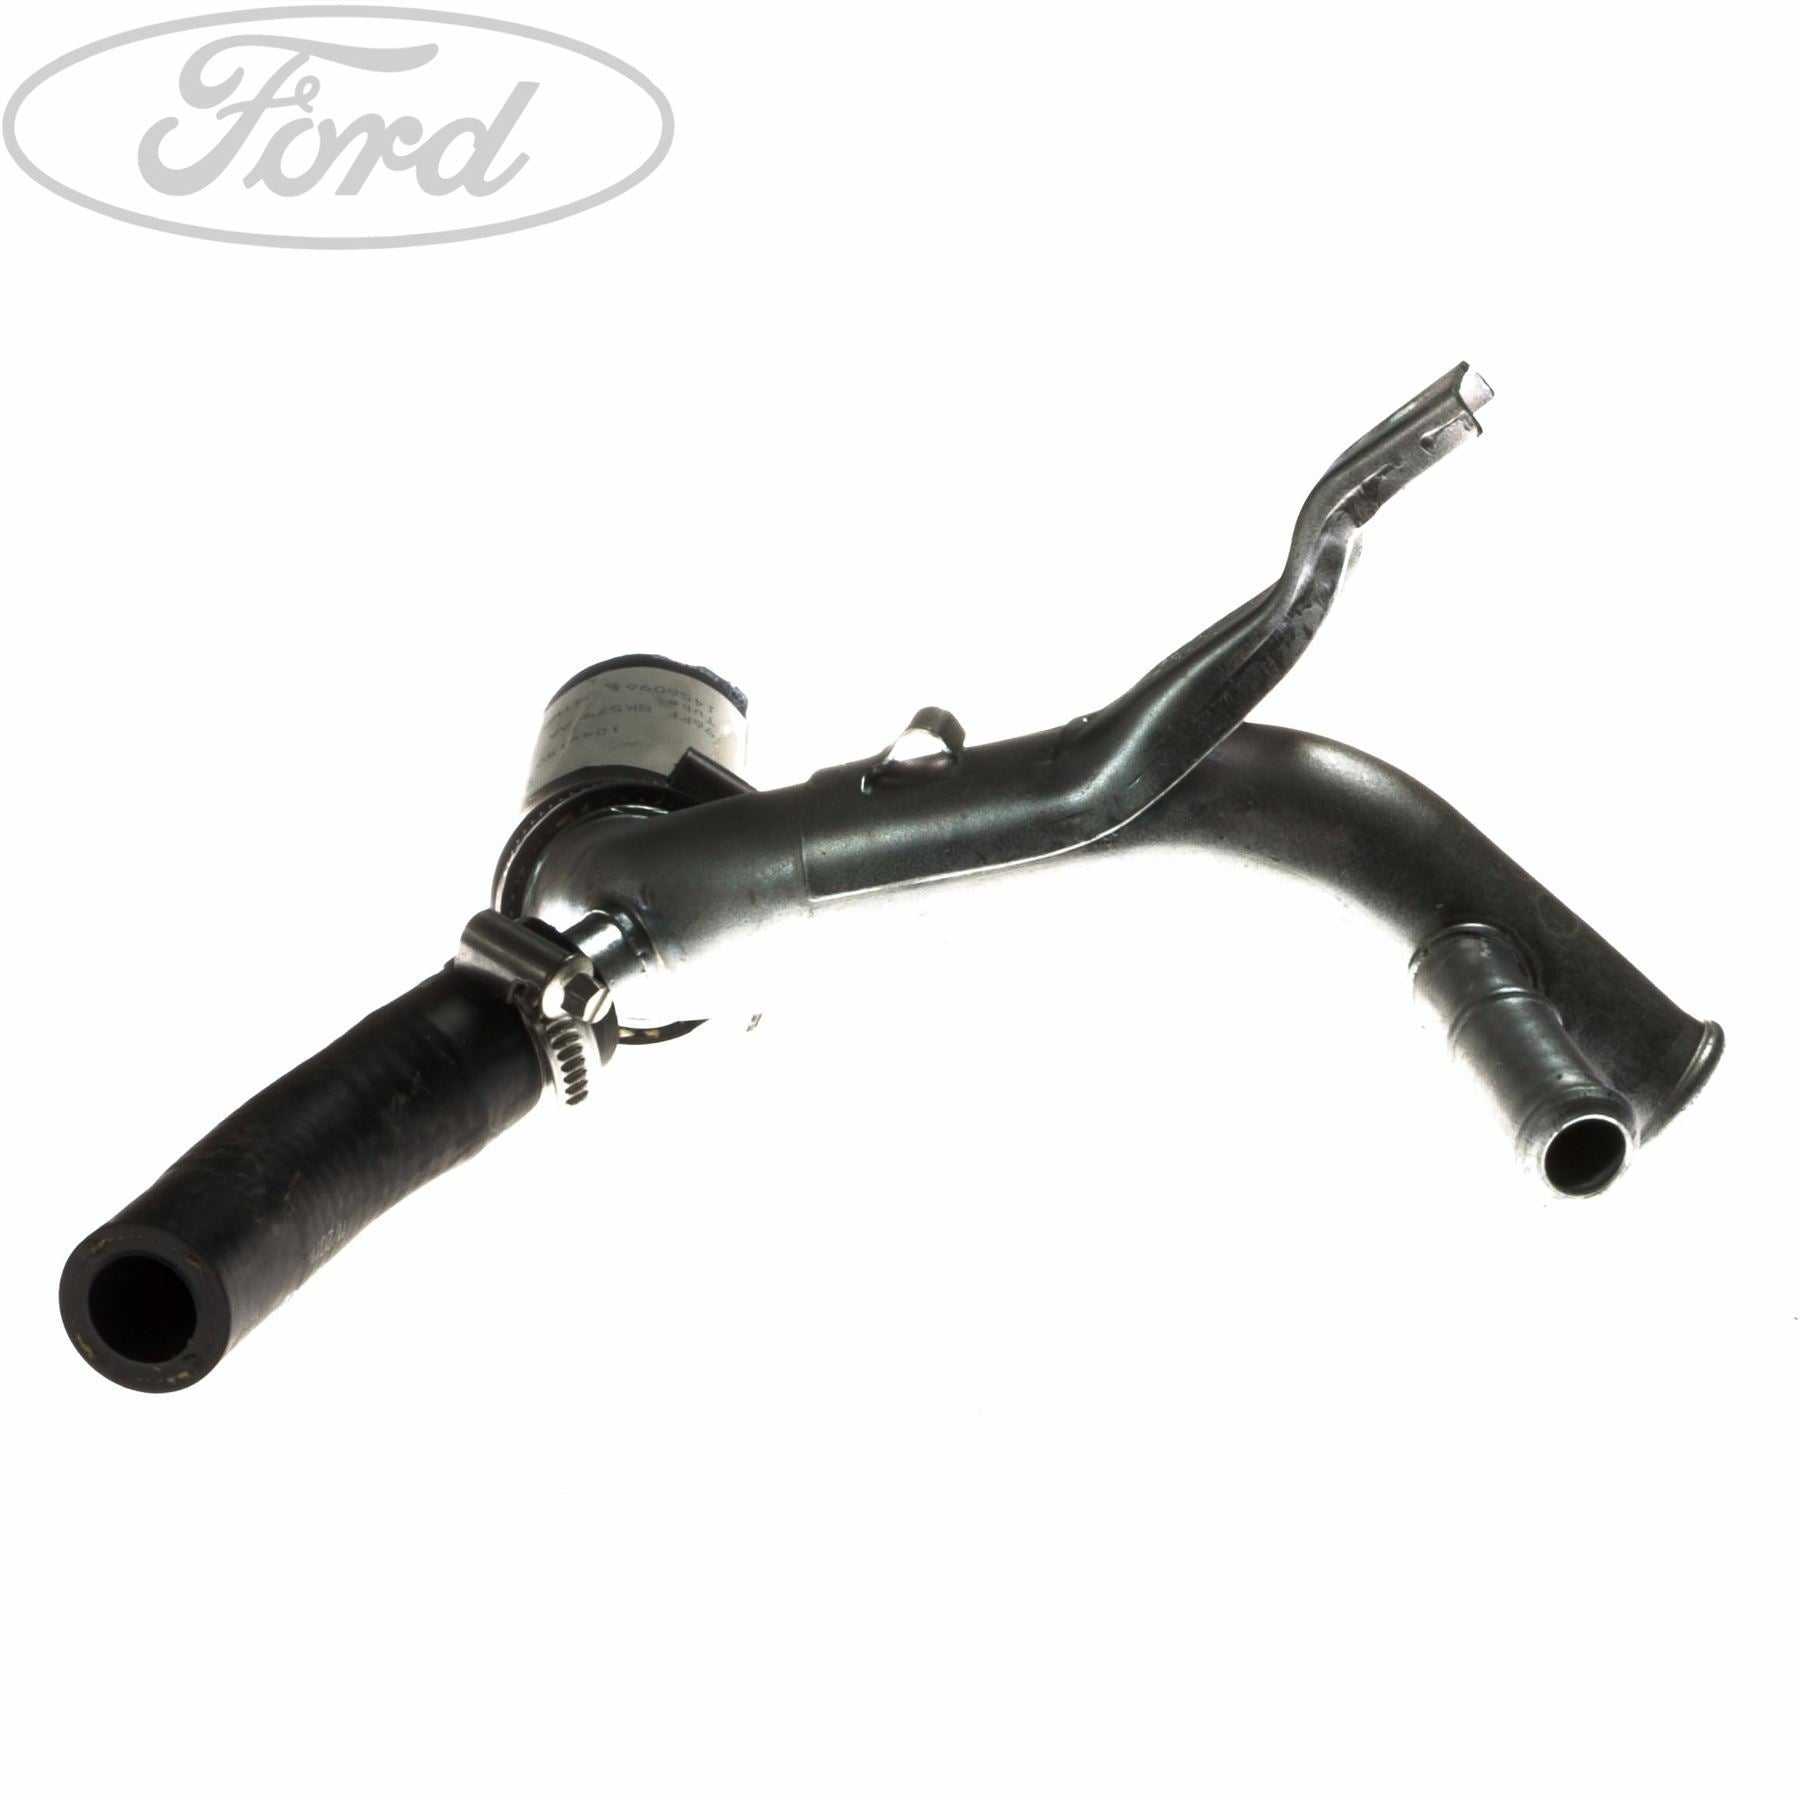 Ford, THERMOSTAT HOUSING TUBE HOSE